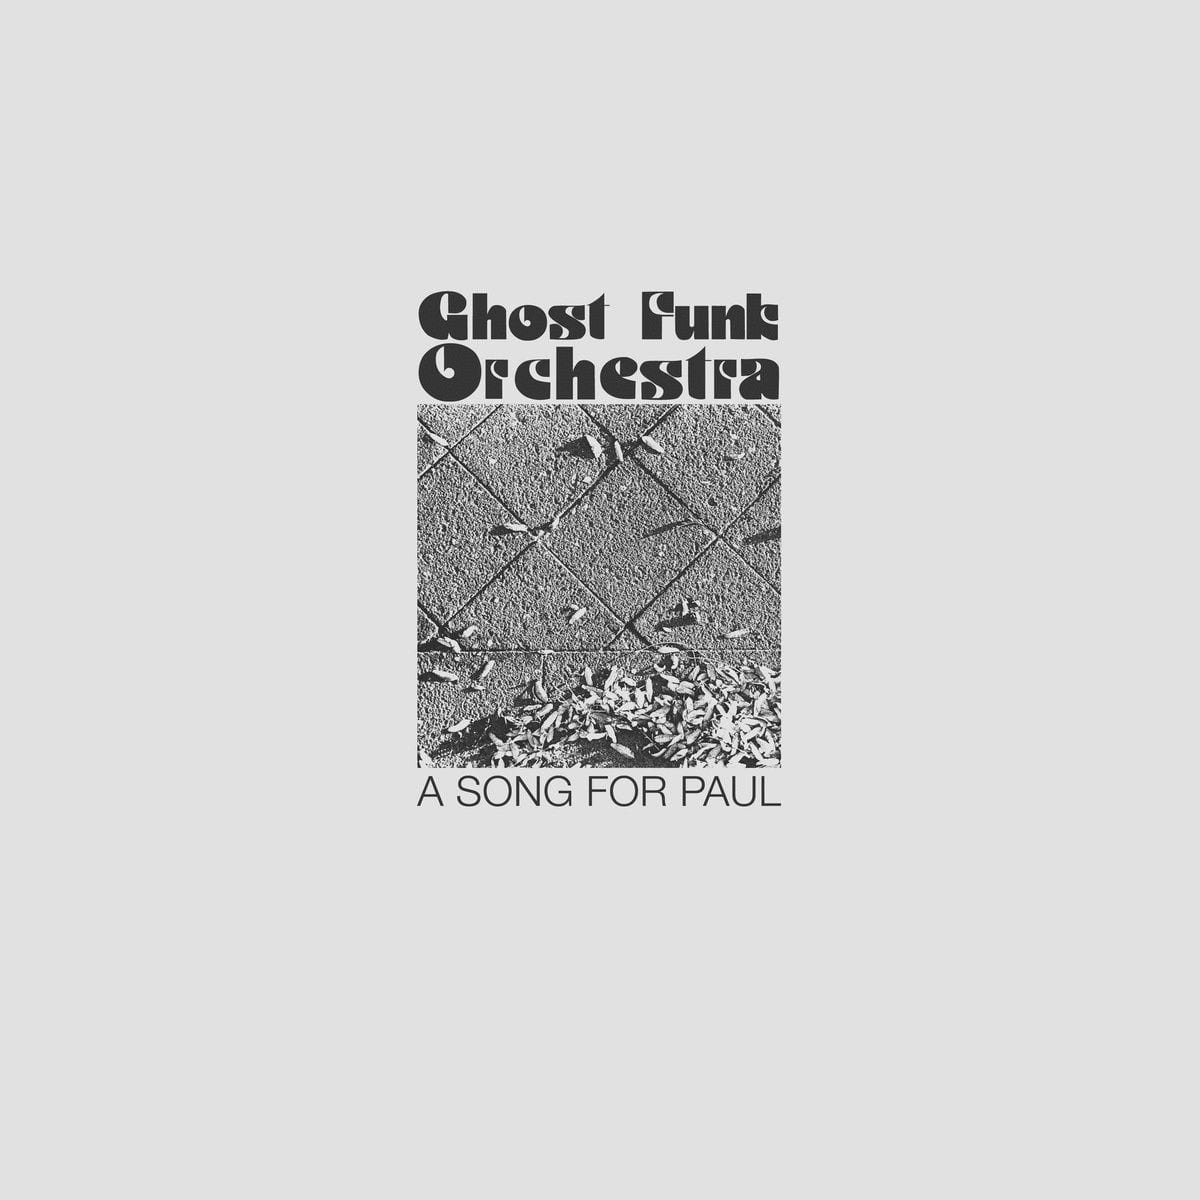 Ghost Funk Orchestra Offer Up ‘A Song for Paul’ and One for Isaac As Well